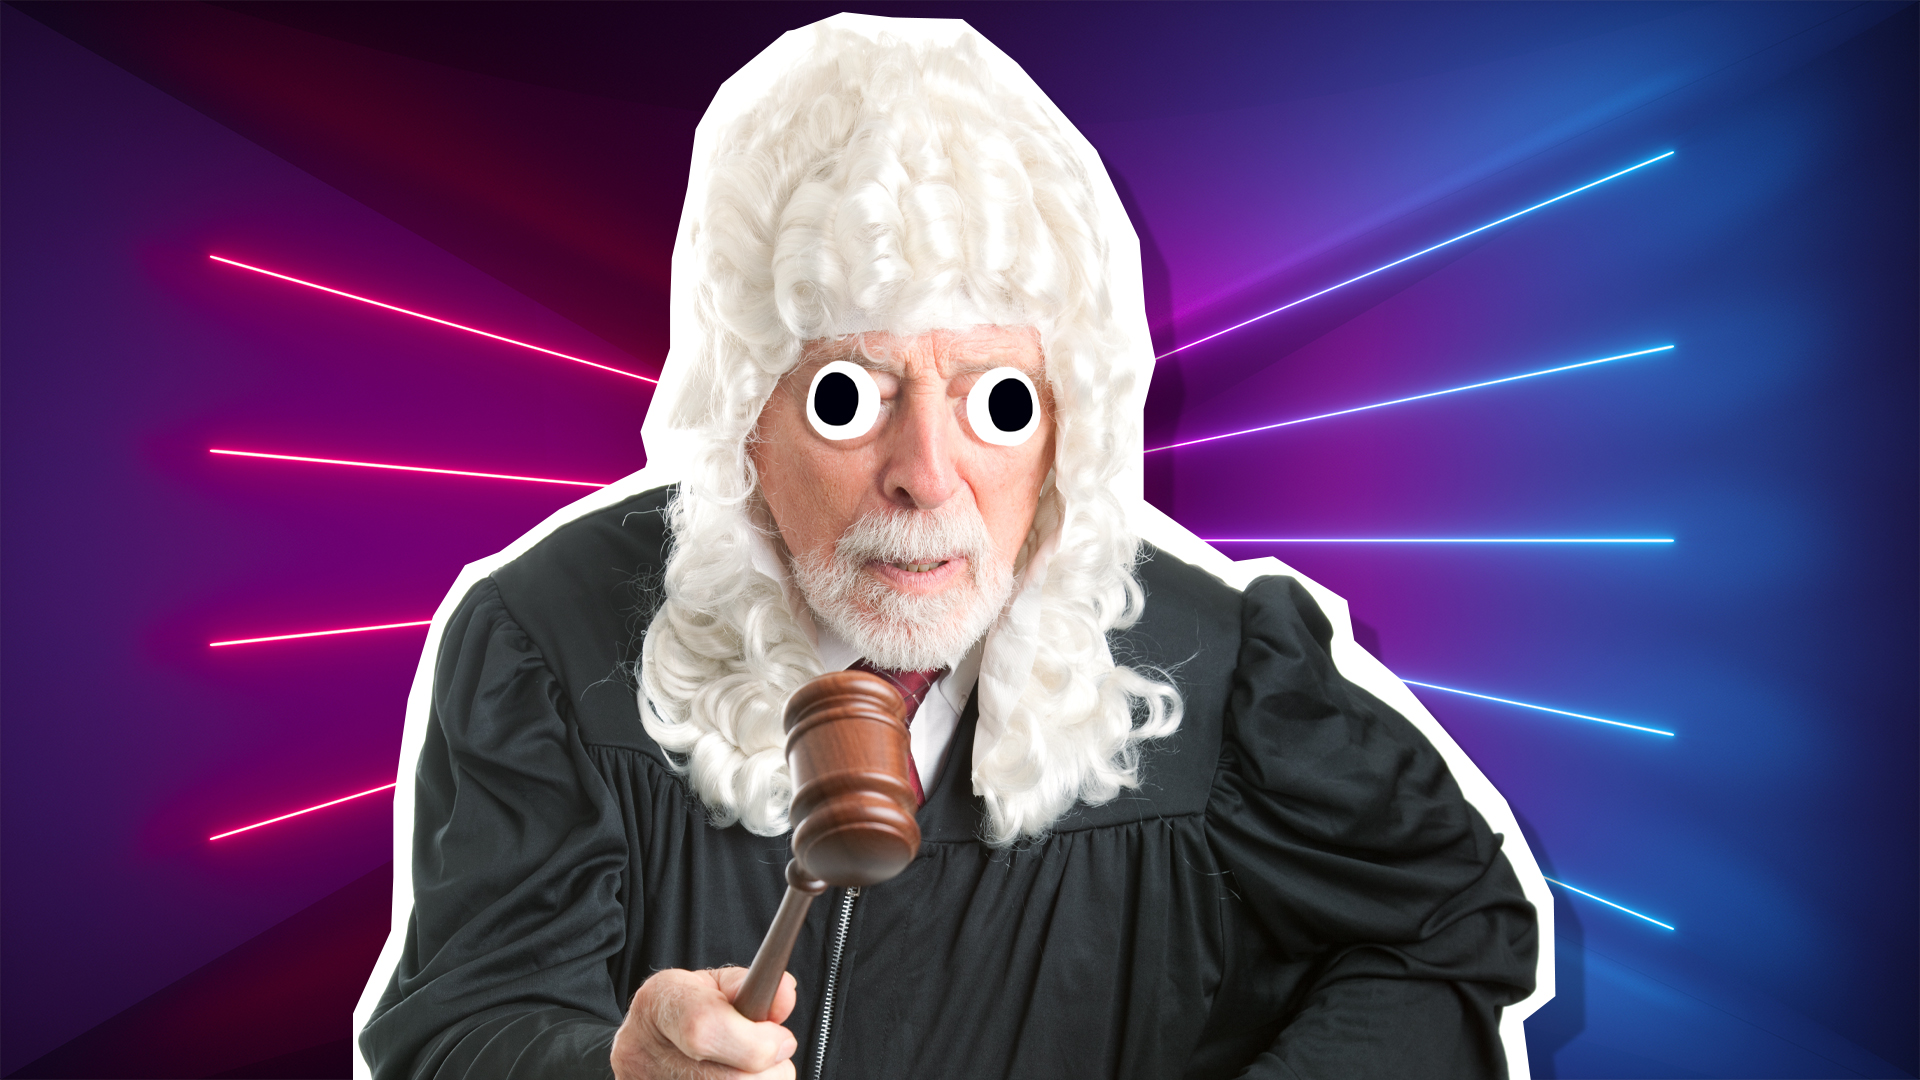 A judge holding a gavel